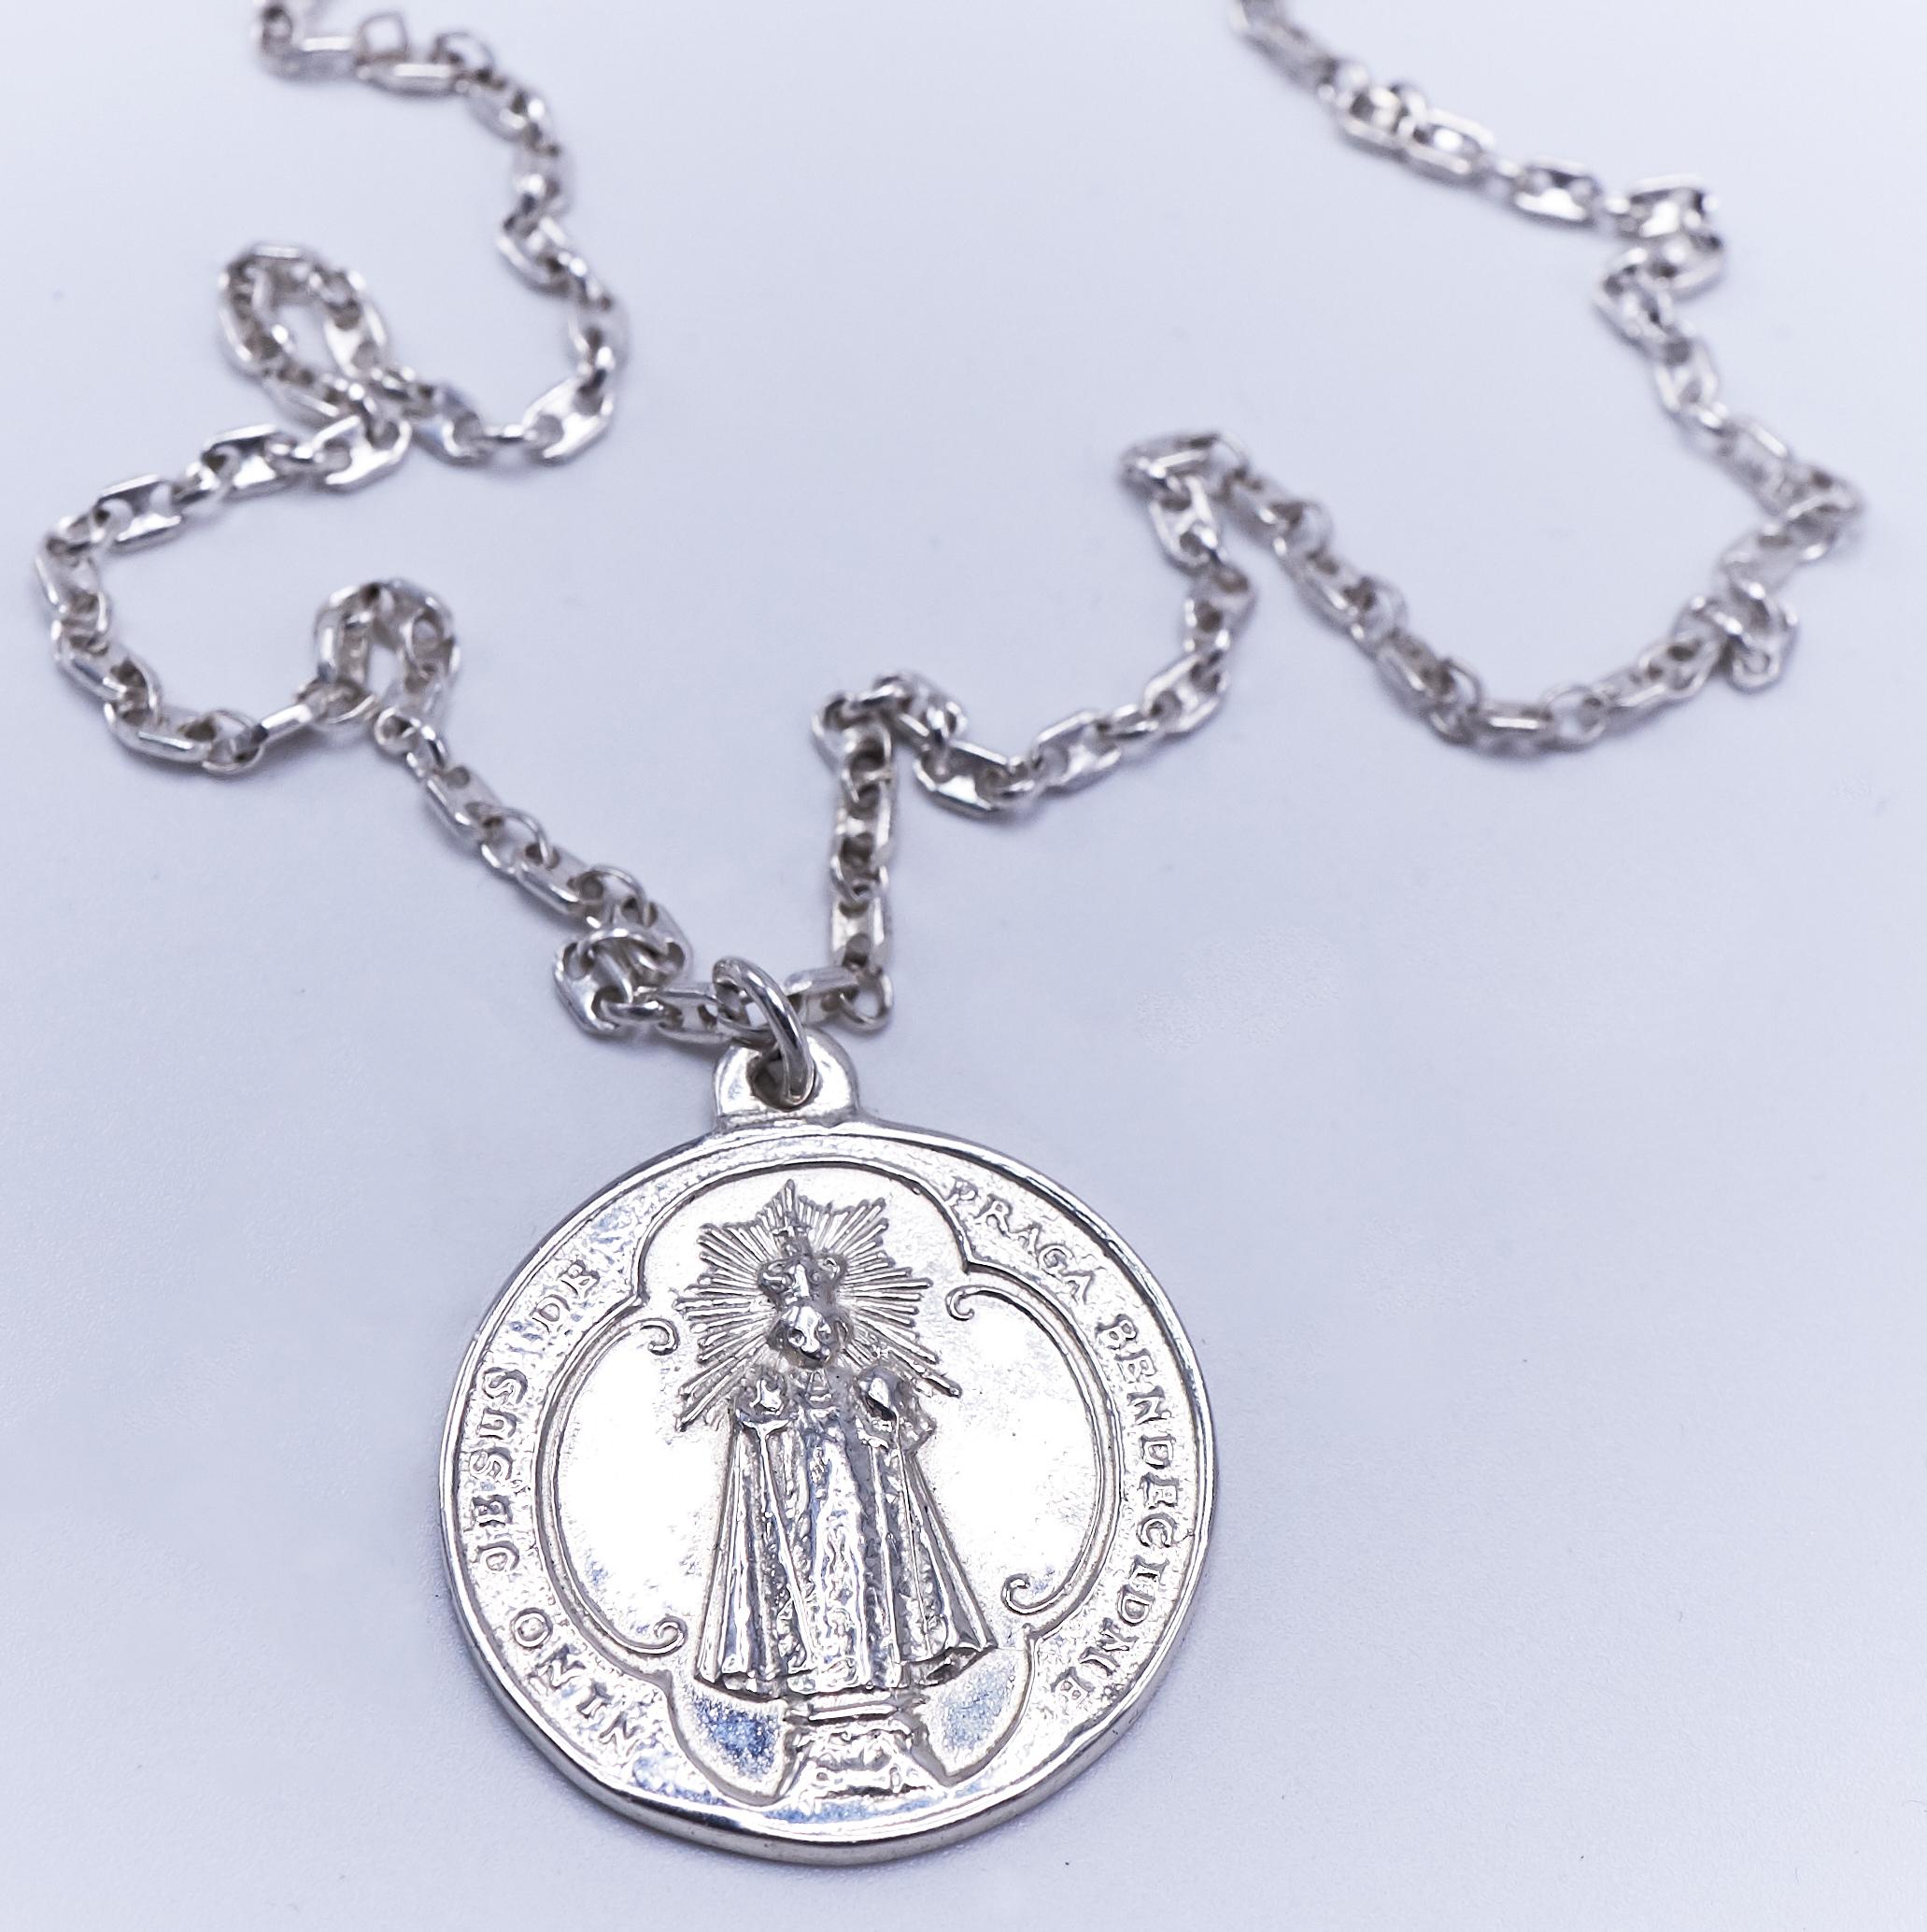 Medal Chain Necklace Miraculous Virgin Mary Black Diamond Silver J Dauphin

J DAUPHIN necklace 